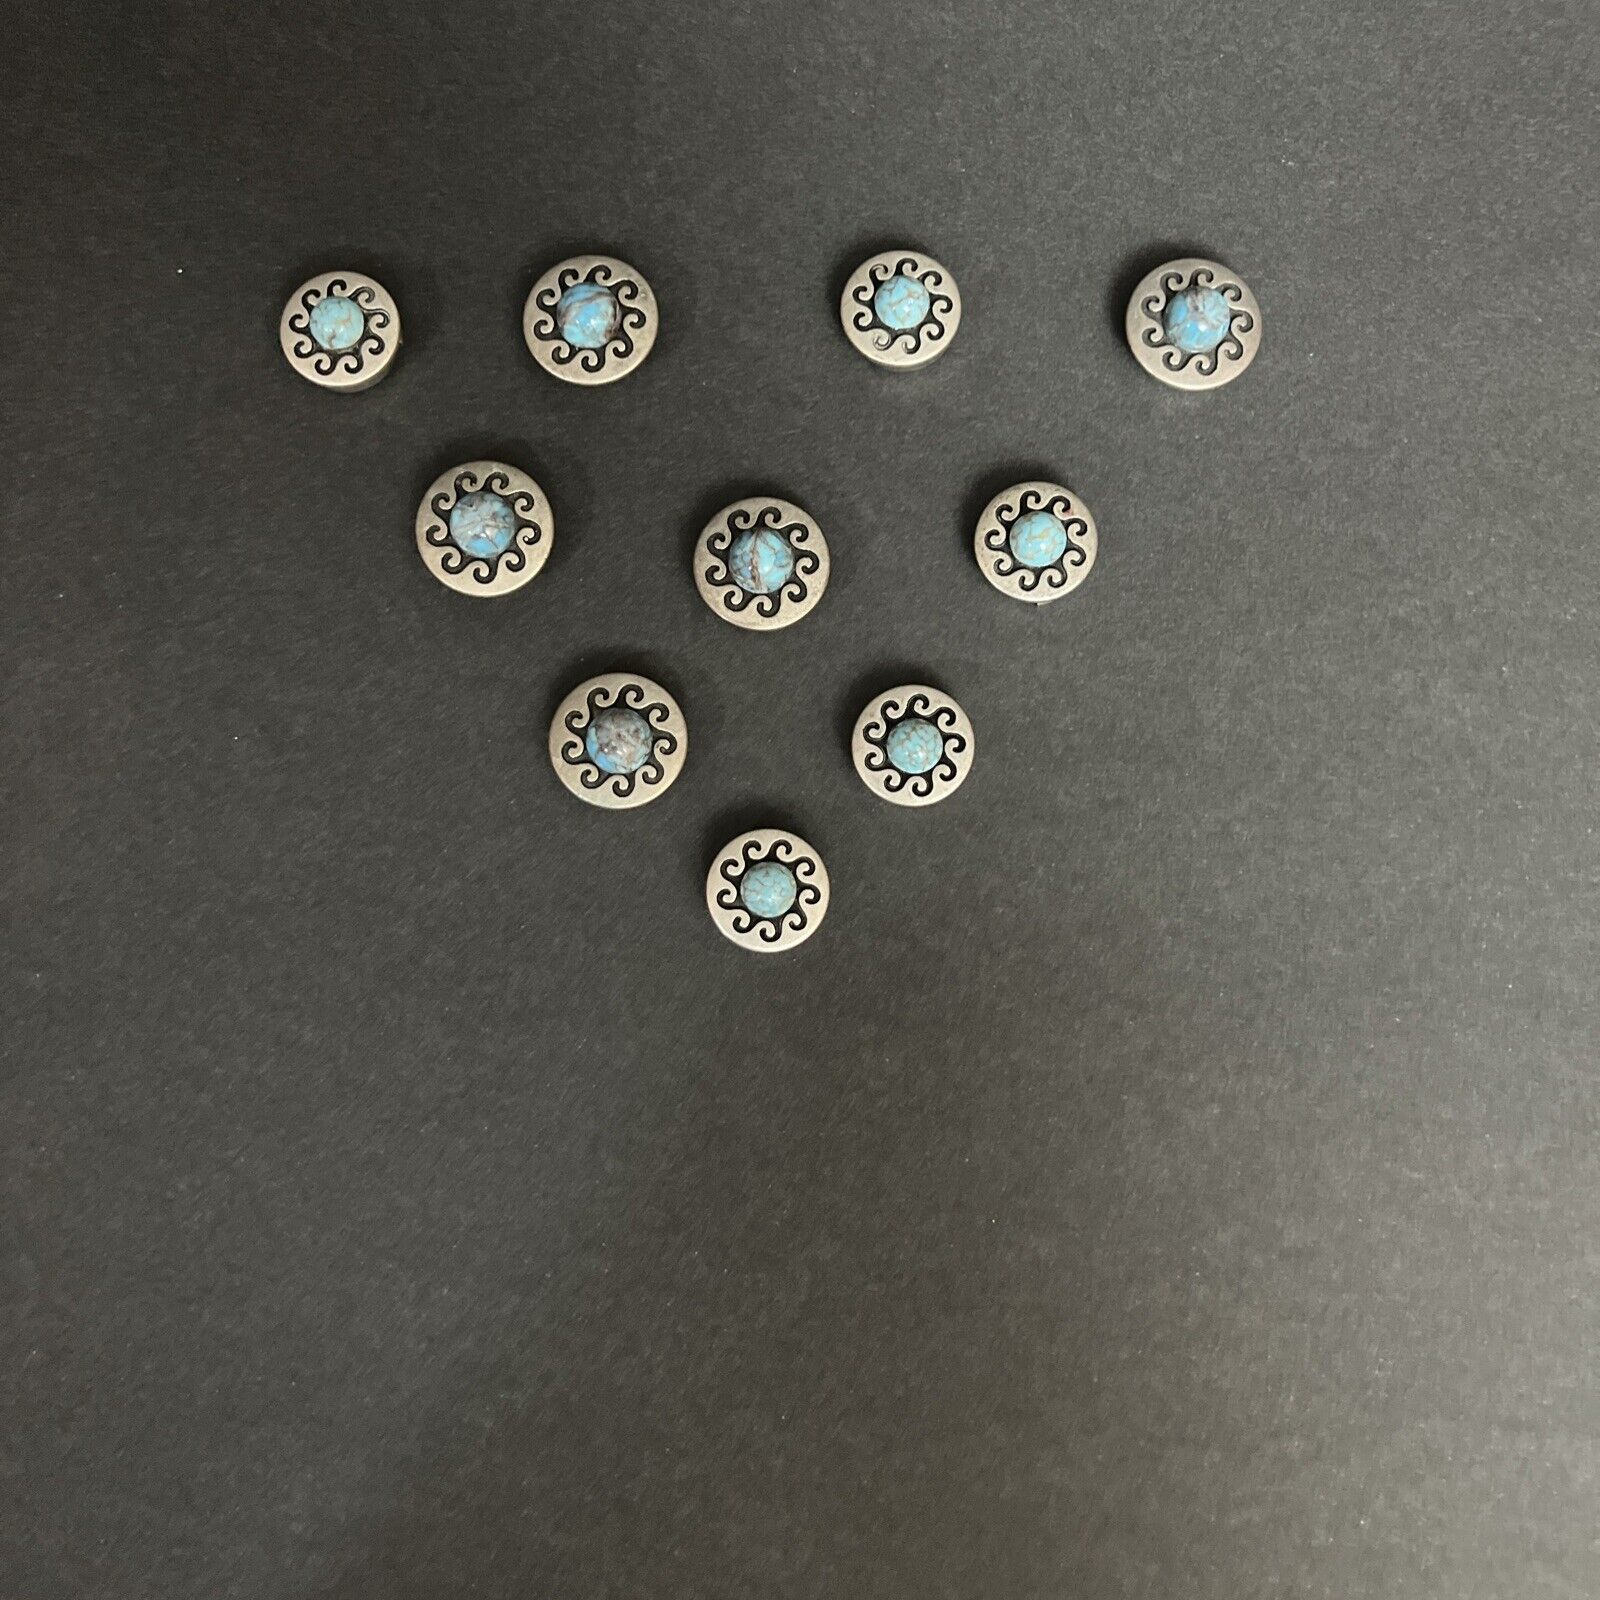 VINTAGE STERLING SILVER NATIVE AMERICAN TURQUOISE BUTTON COVER SET OF 10